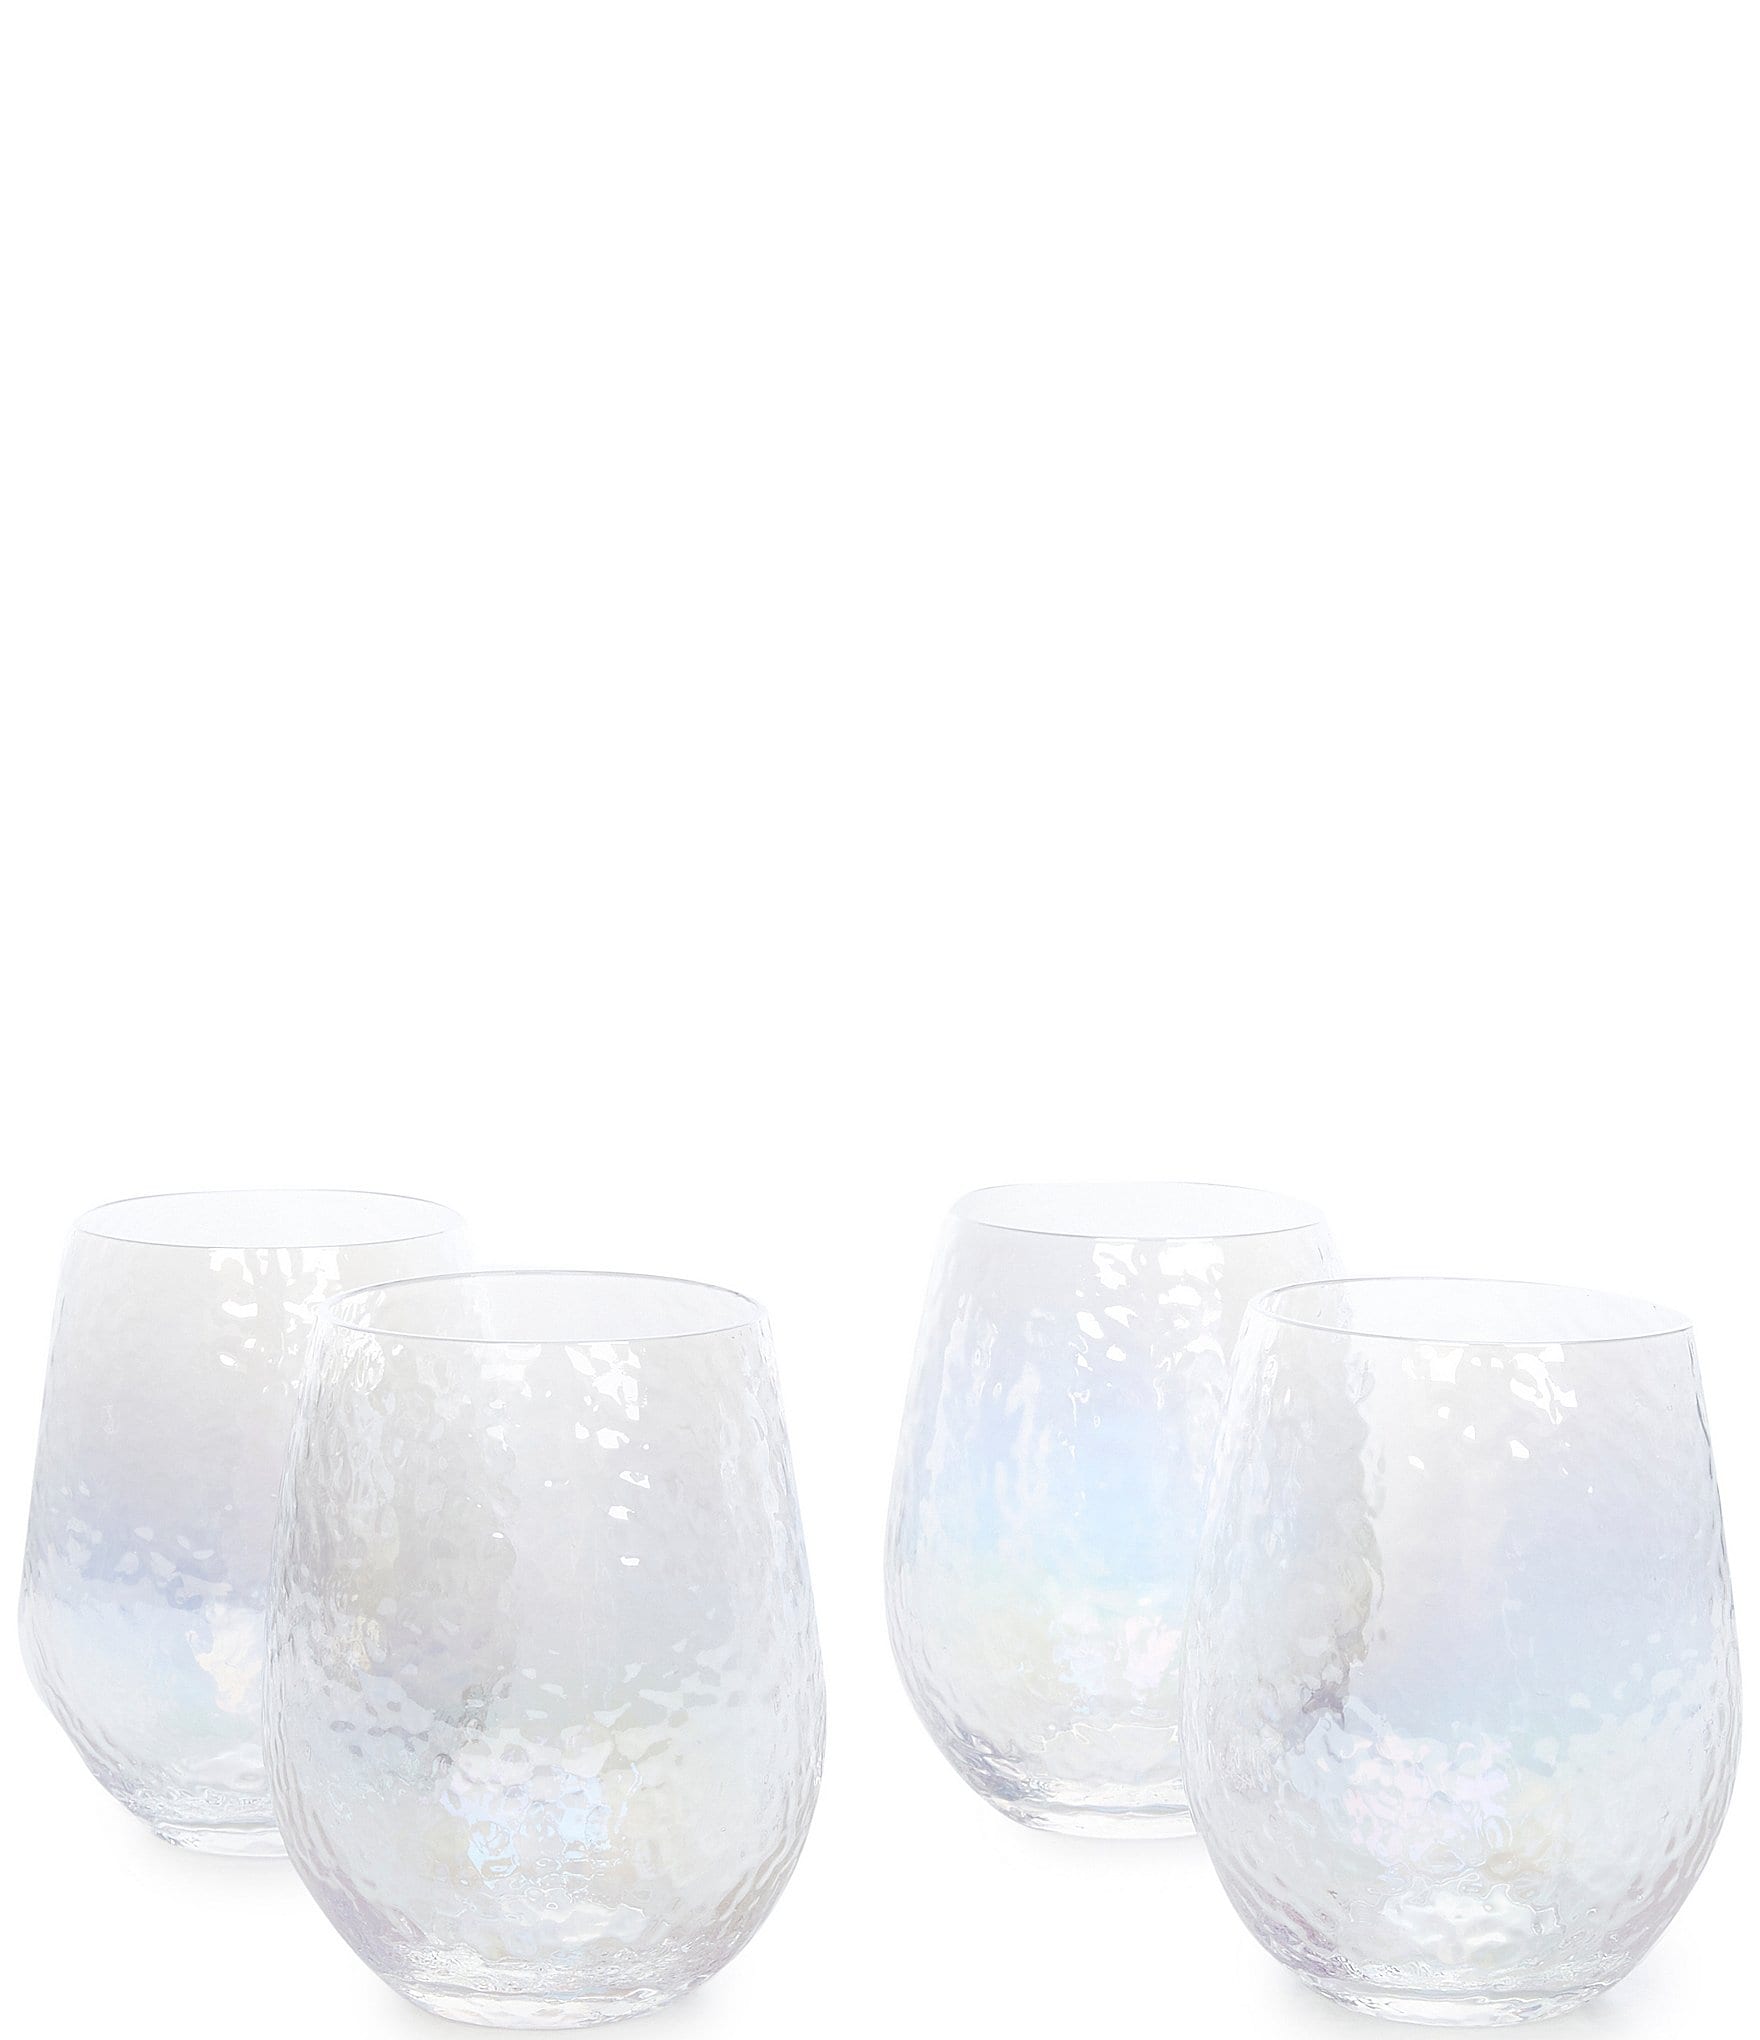 https://dimg.dillards.com/is/image/DillardsZoom/zoom/southern-living-clear-luster-stemless-wine-glasses-set-of-4/00000000_zi_a4b5d5d0-fcb4-458c-9e53-1e51a9e2fa57.jpg